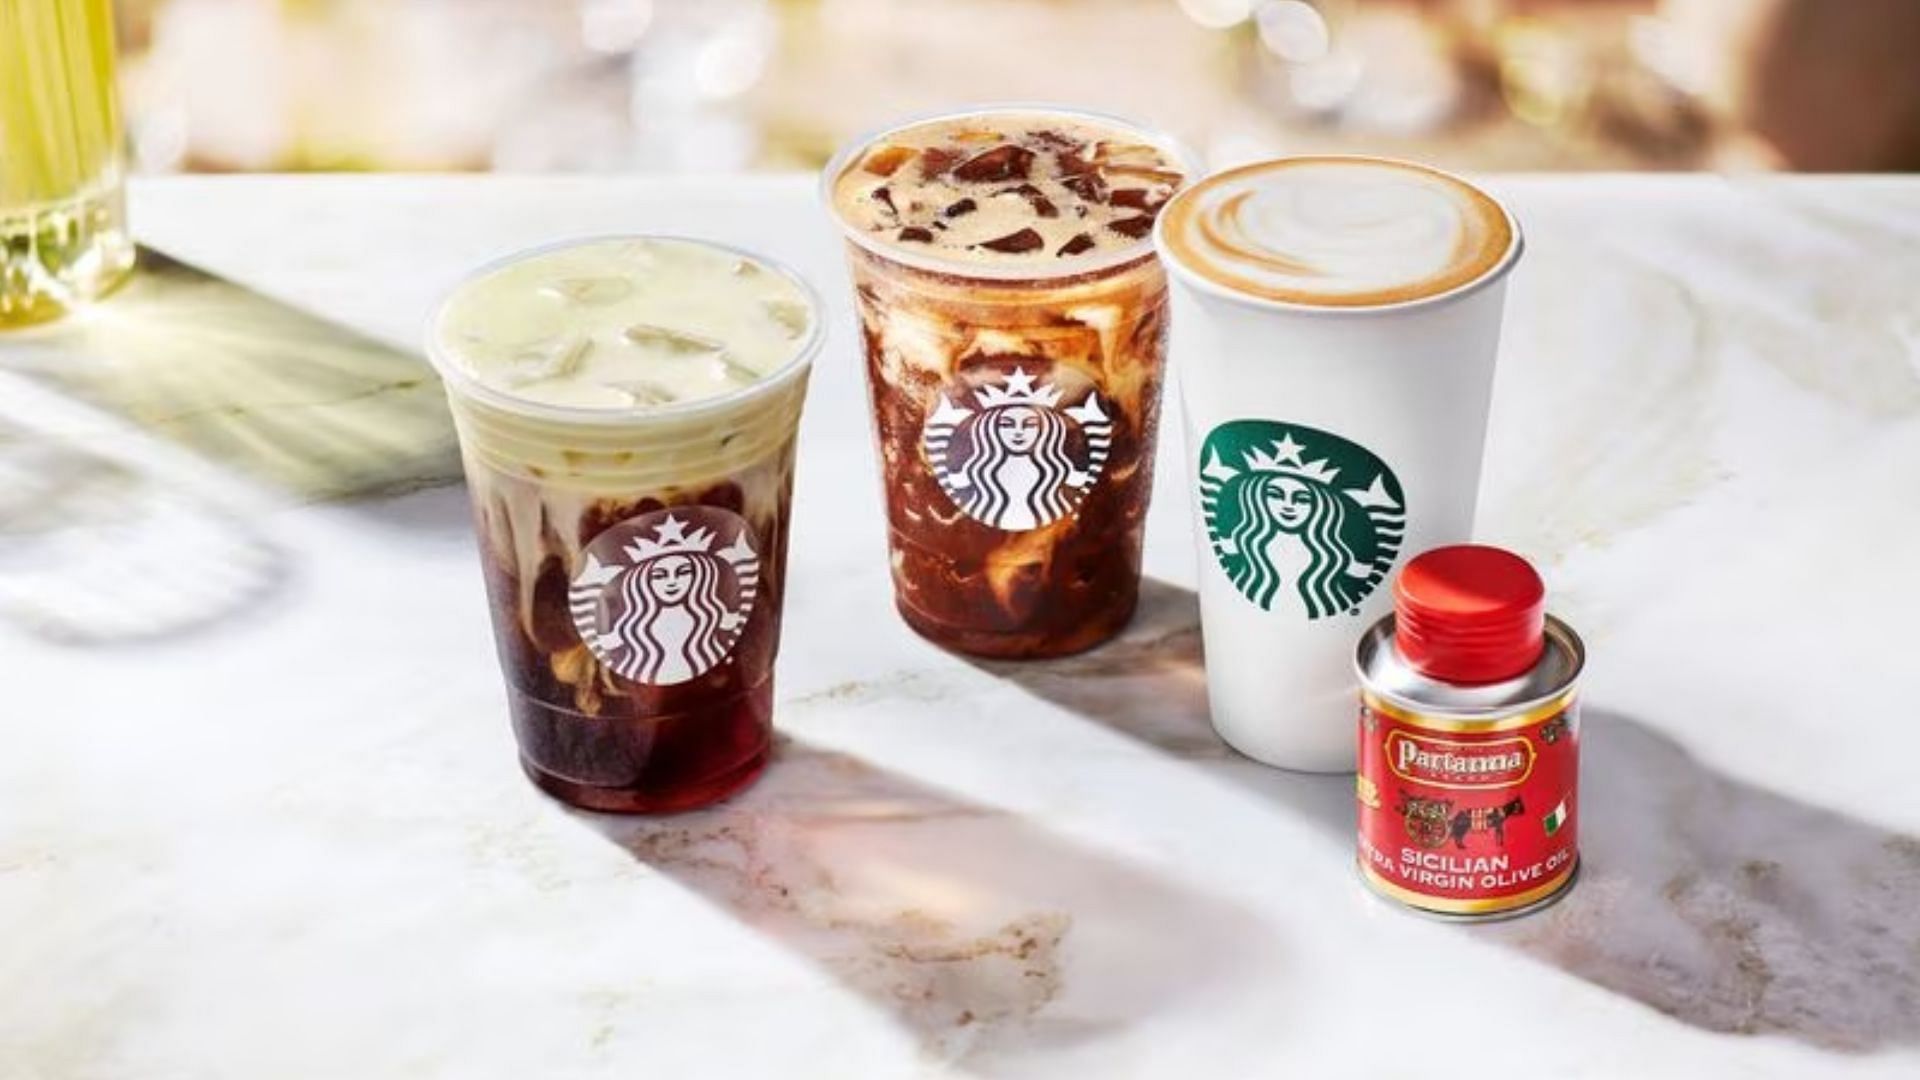 The Oleato range offers select coffee beverages that come with a spoonful of Partanna cold-pressed olive oil (Image via Starbucks/Business Wire)